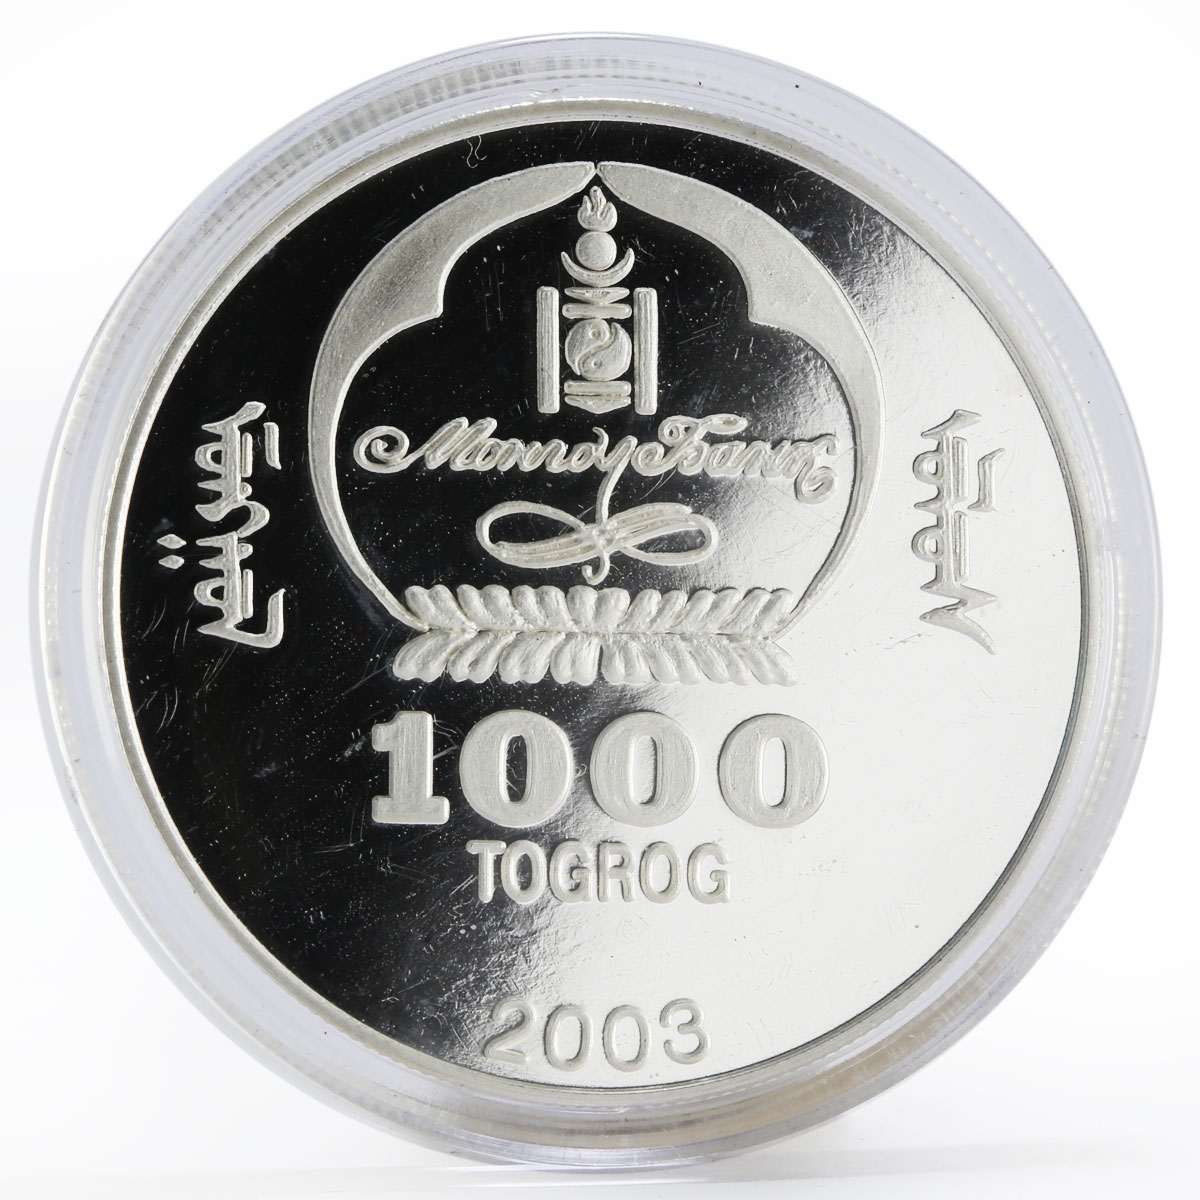 Mongolia 1000 togrog History of Asia Conficius proof silver coin 2003